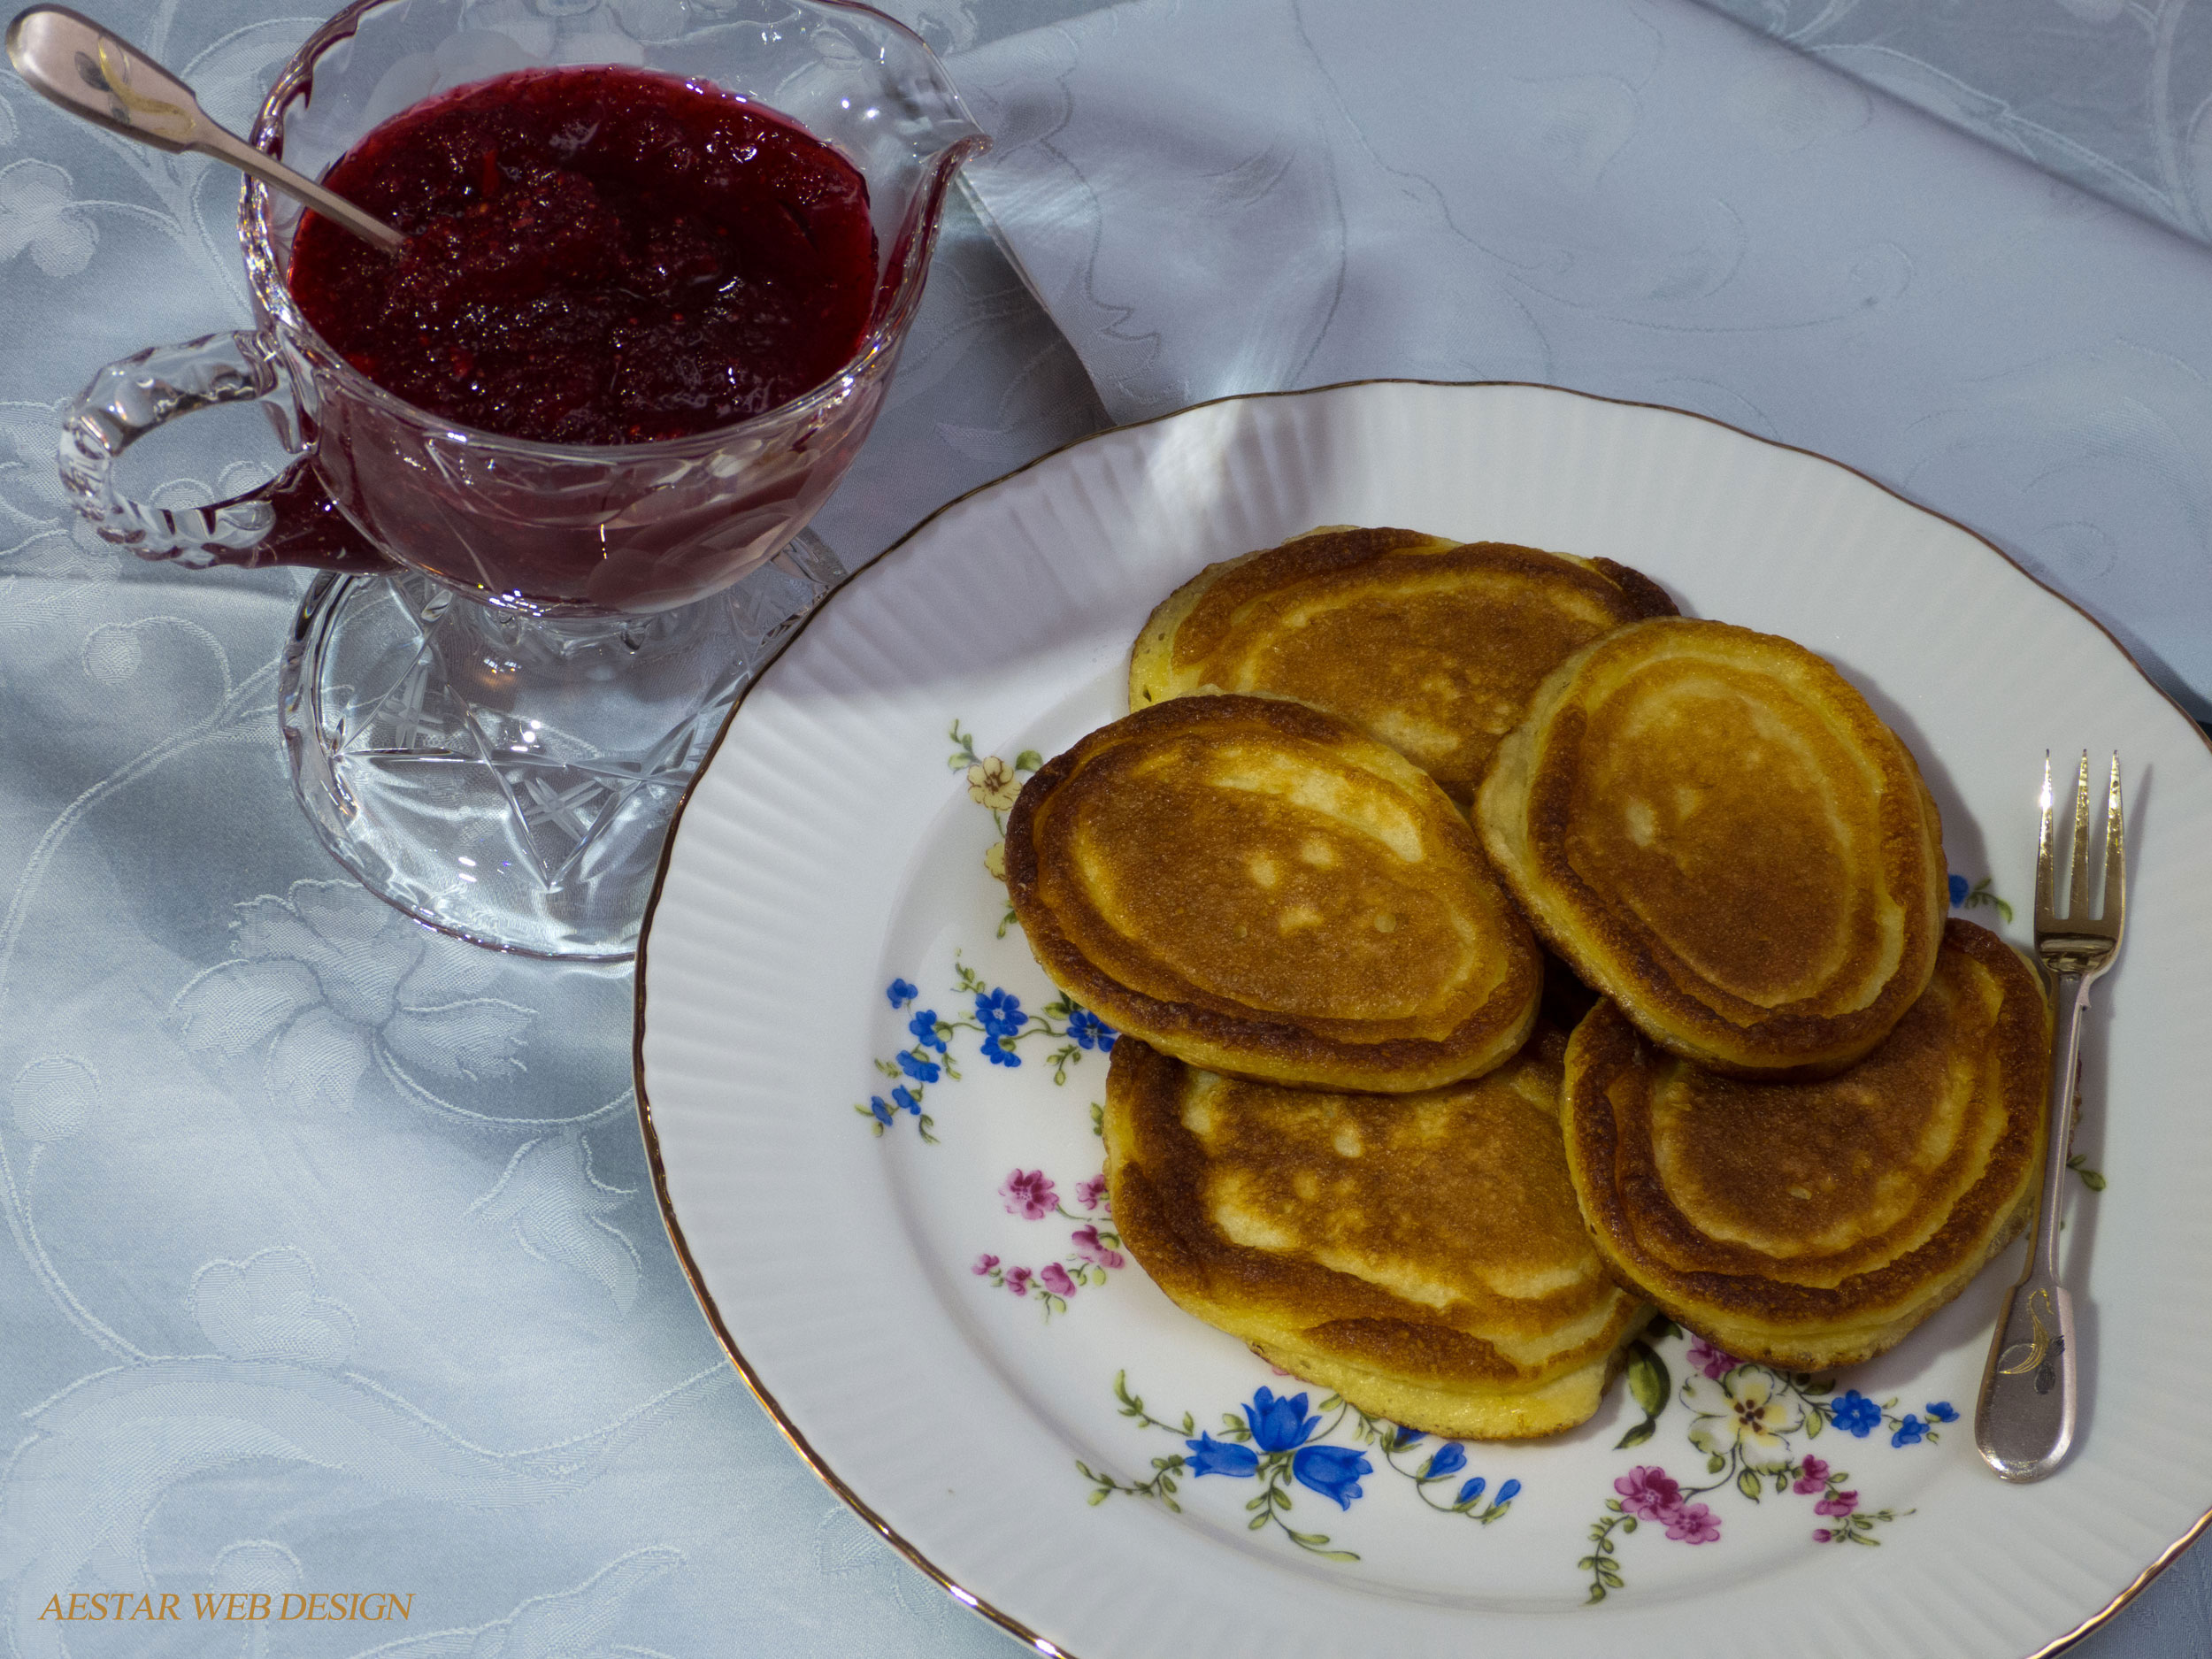 Web Product Photography, Food Photography, Pancakes, New York City